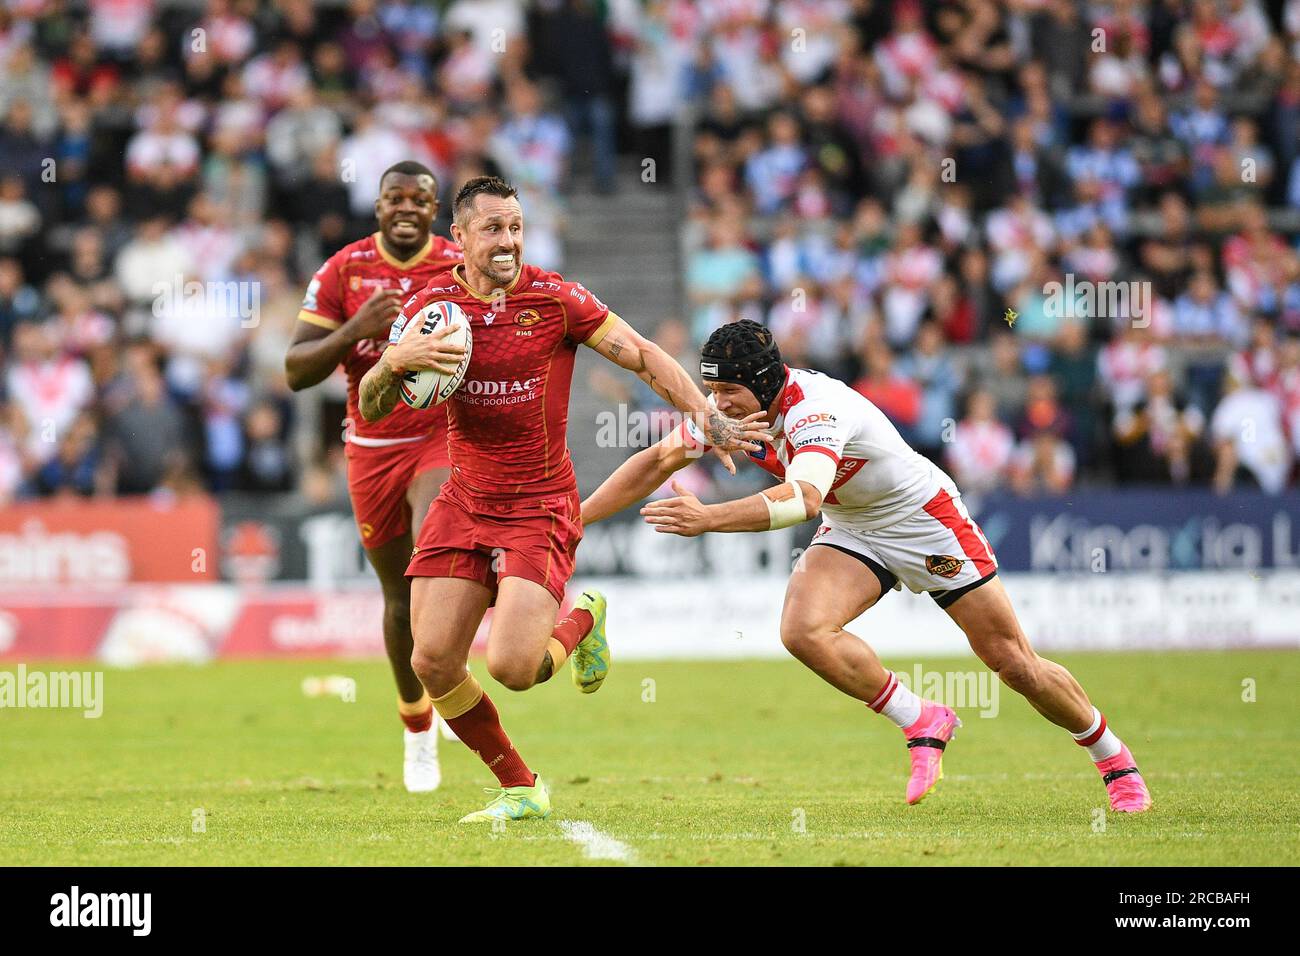 St. Helens, Angleterre - 13 juillet 2023 - Mitchell Pearce de Catalan Dragons fait une pause. Betfred Super League, St. Helens vs Catalan Dragons au Totally Wicked Stadium, St. Helens, Royaume-Uni Banque D'Images